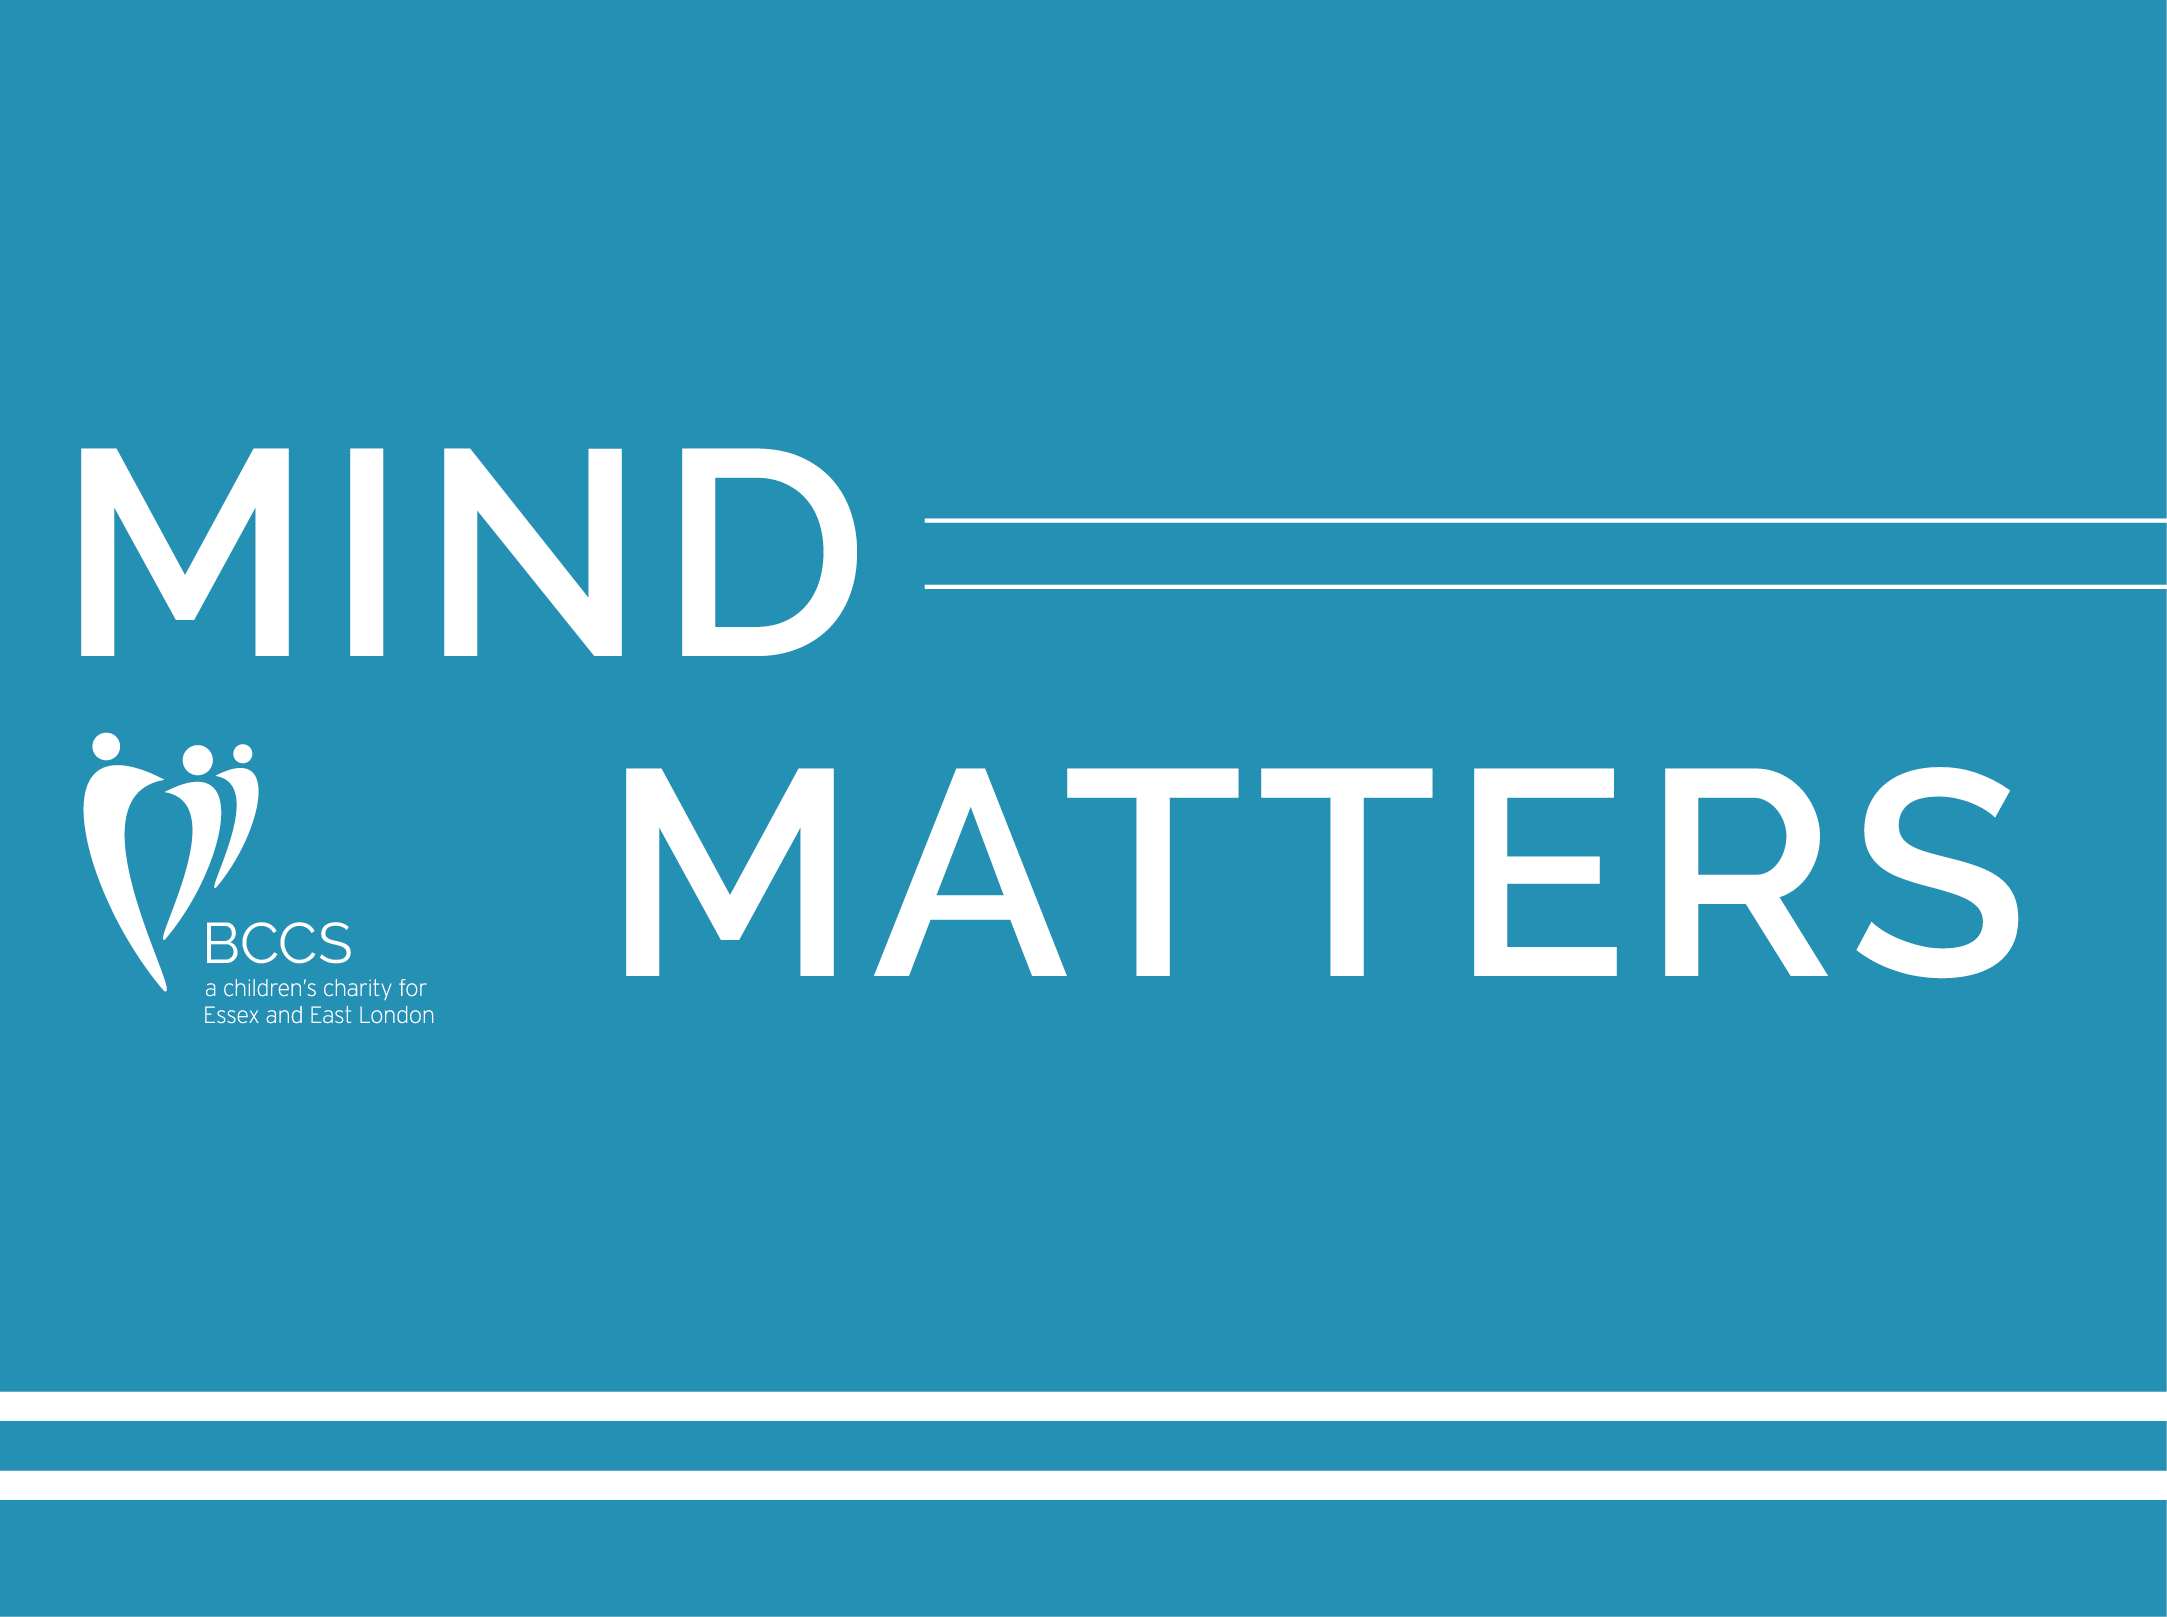 Mind Matters 520x388px (002).png